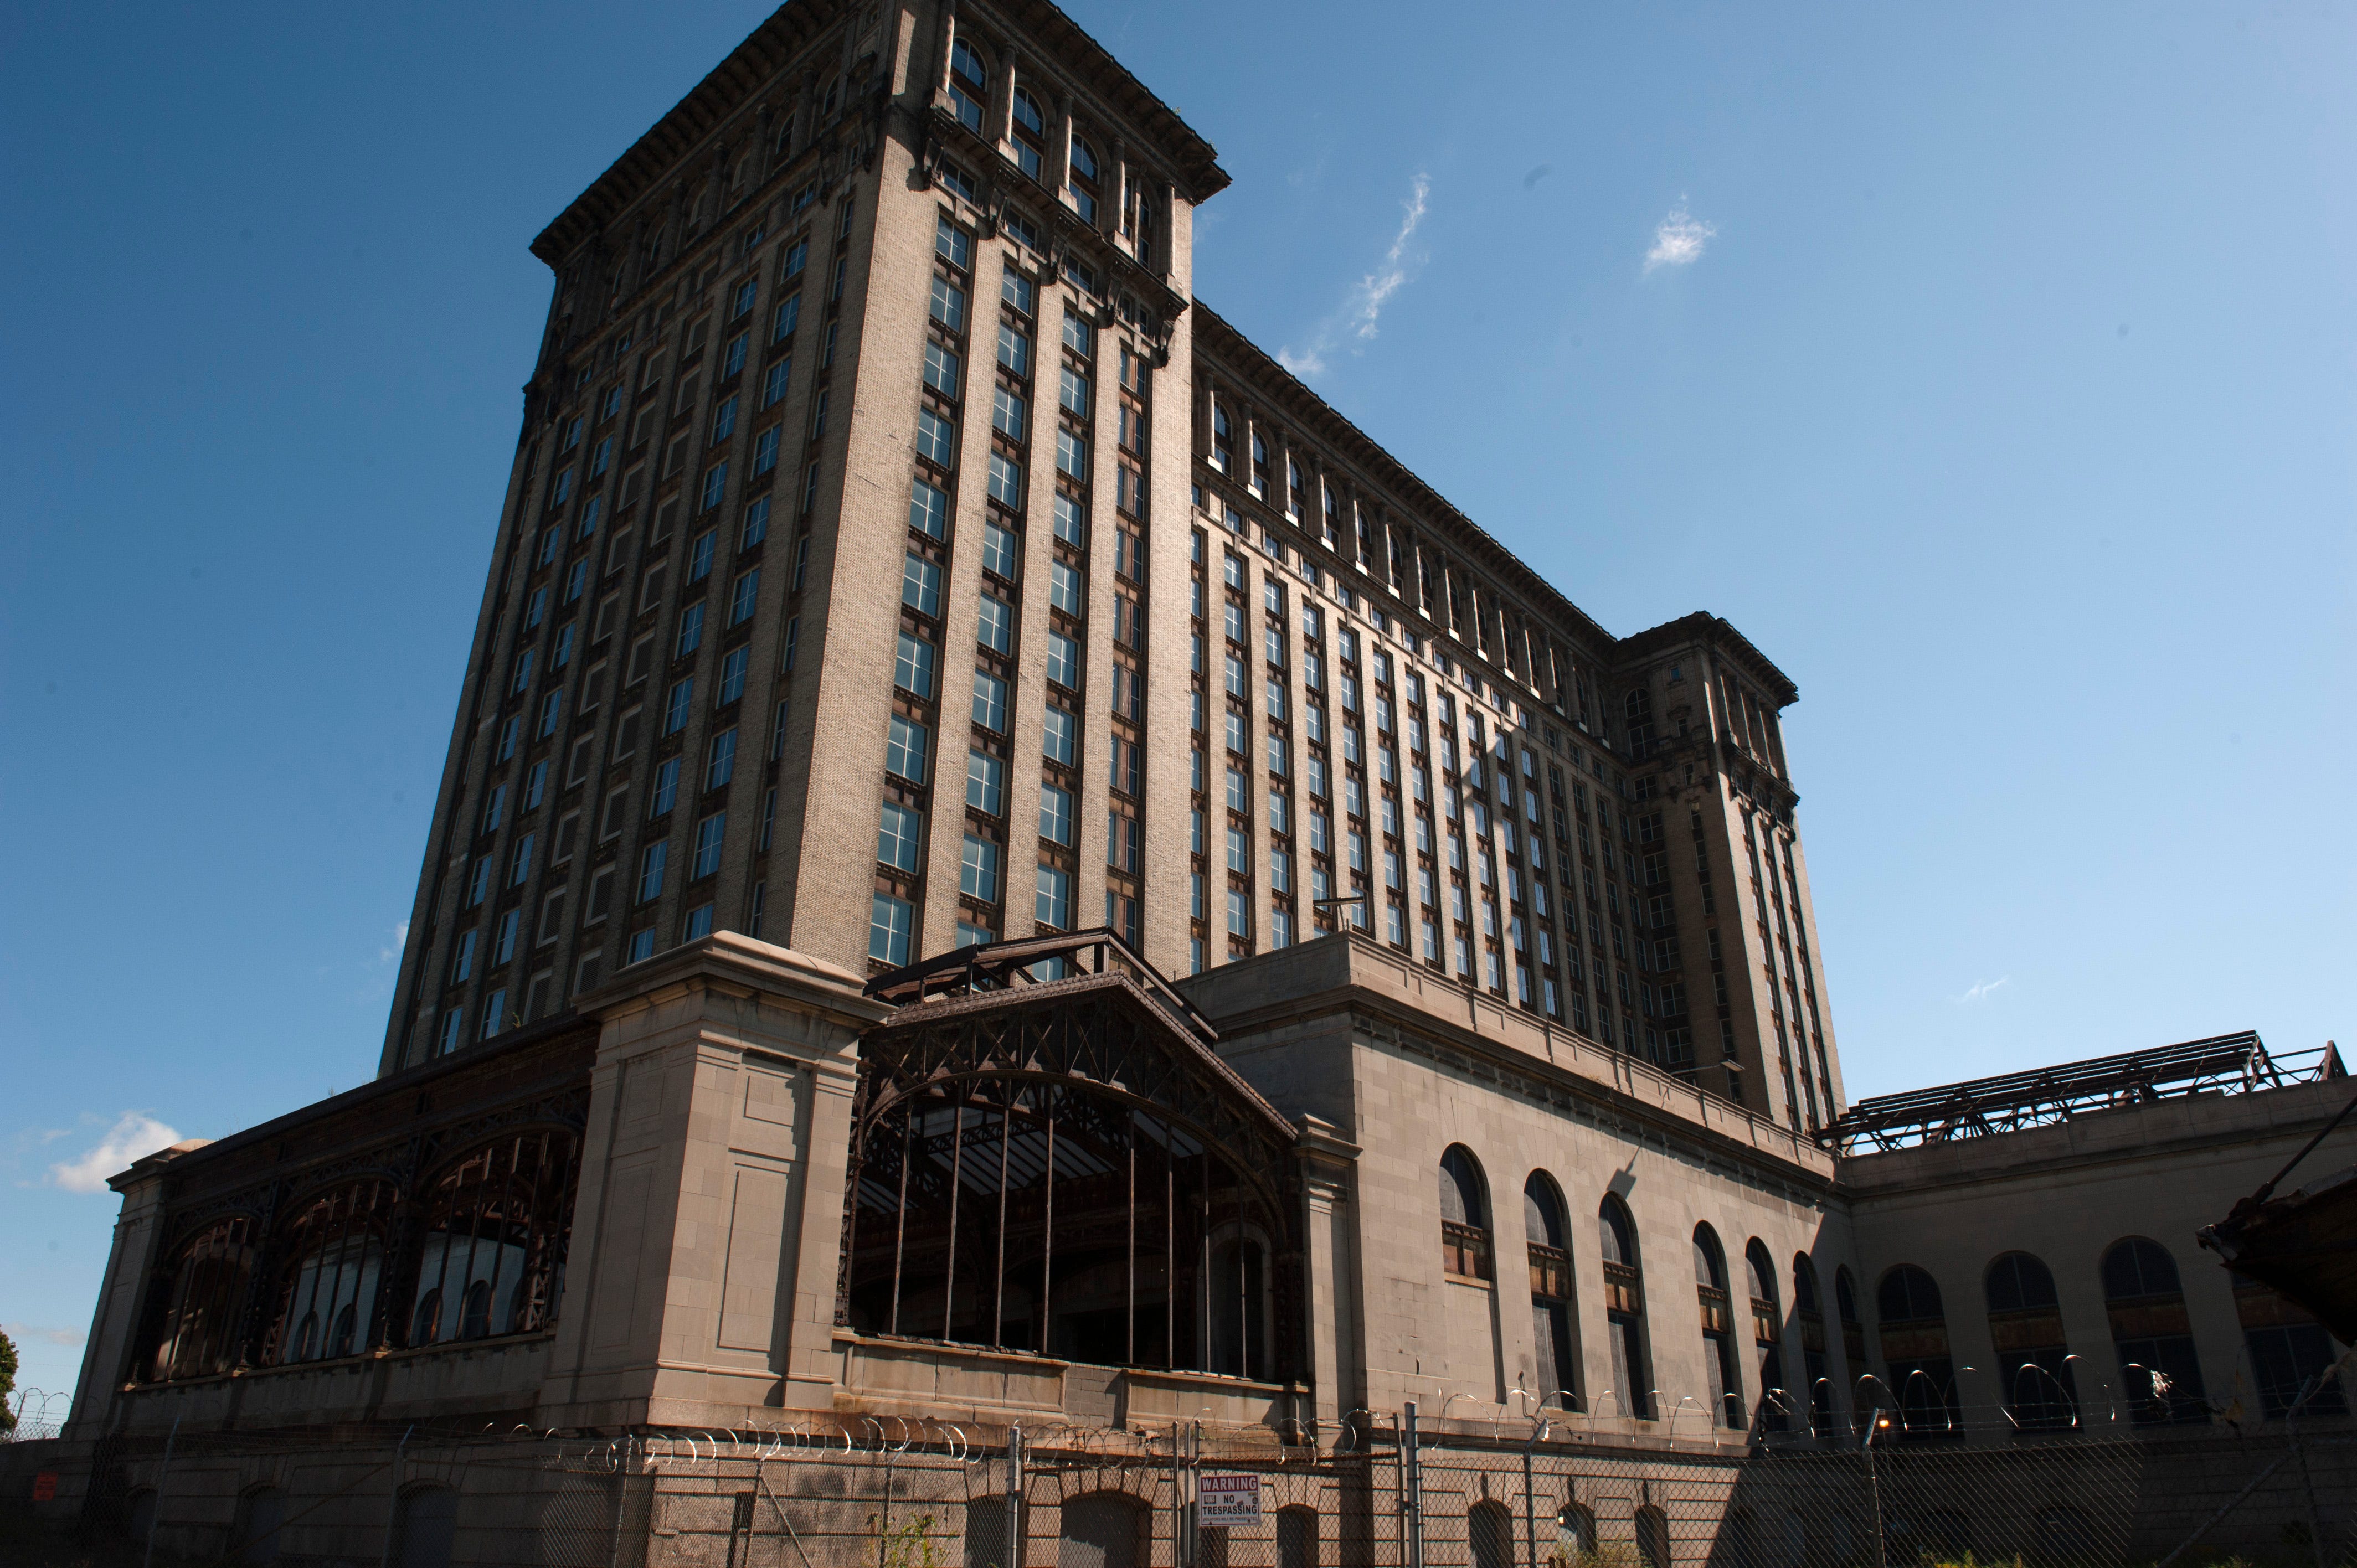 Exterior of the Michigan Central Station in Detroit.